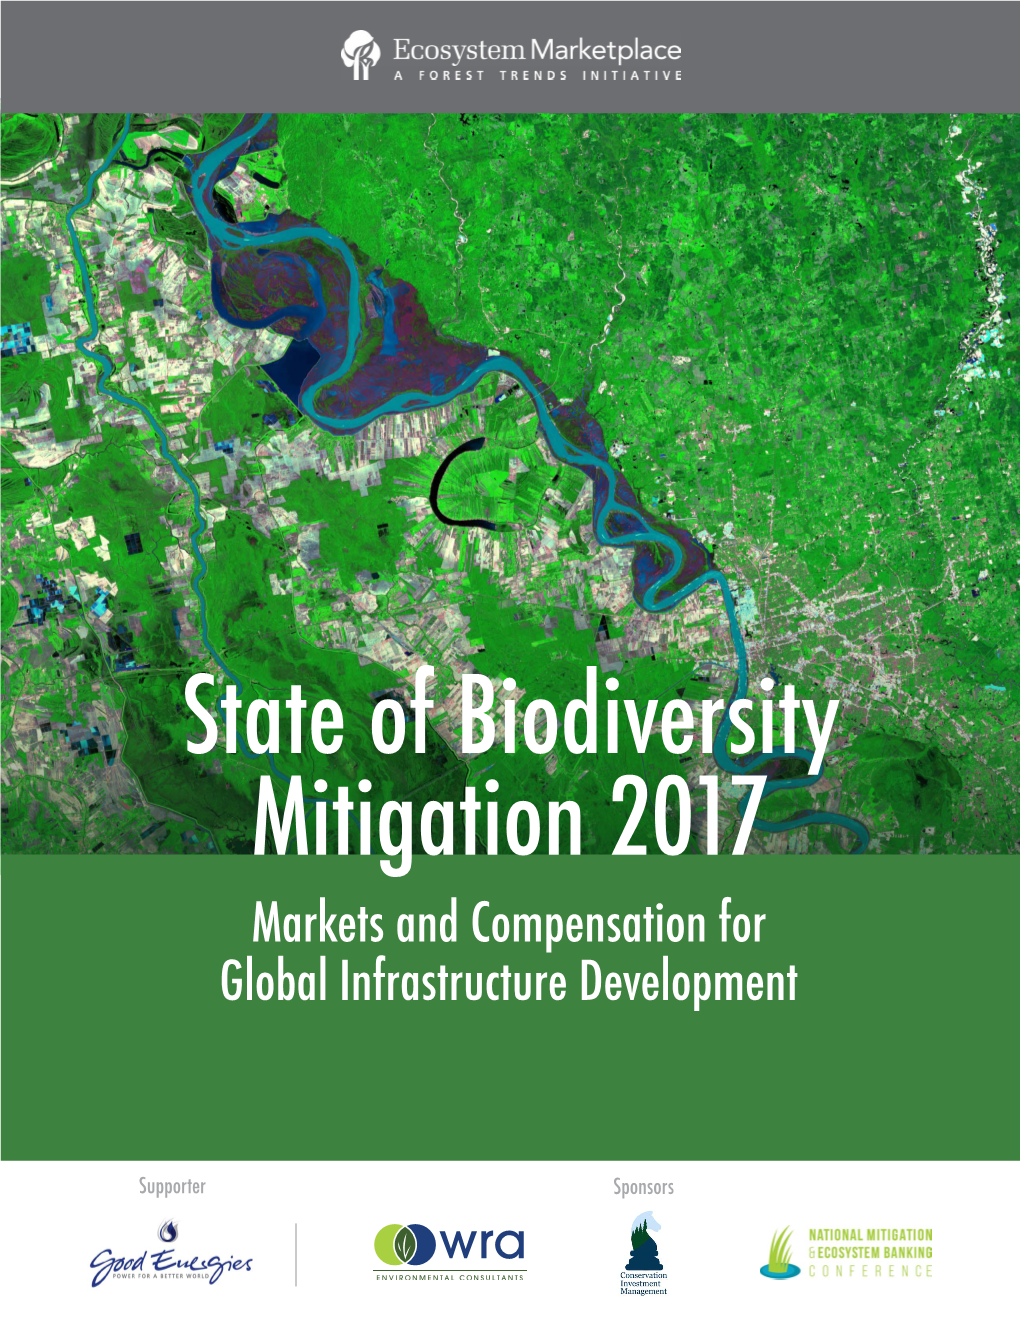 State of Biodiversity Mitigation 2017 Markets and Compensation for Global Infrastructure Development